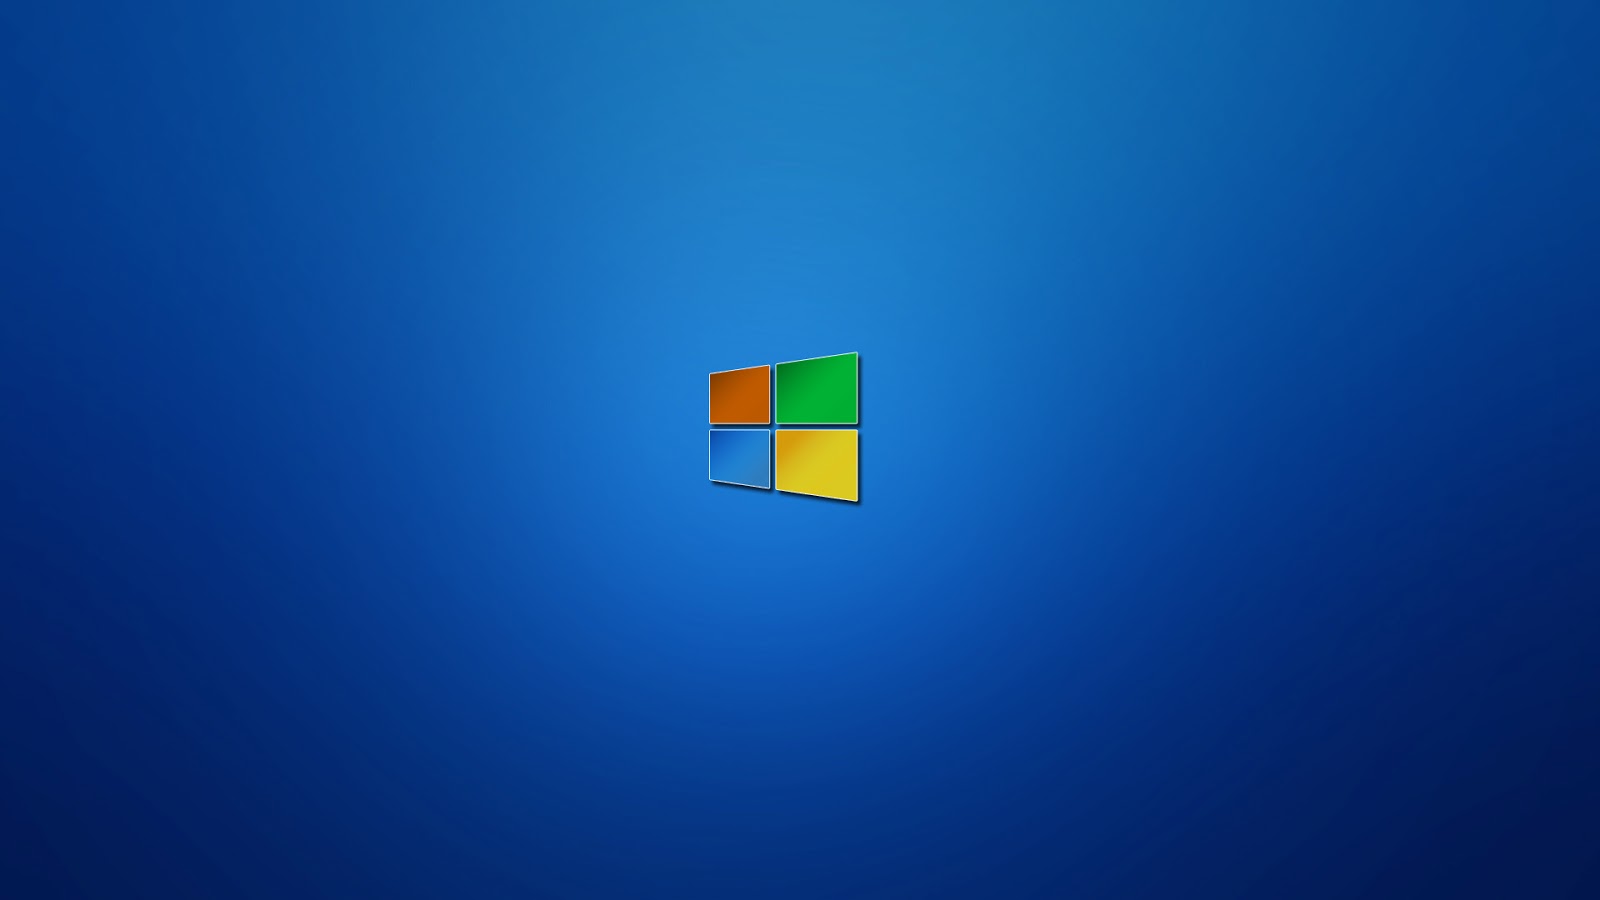 Windows 8 5 HD Wallpapers   Ars Pc Zone